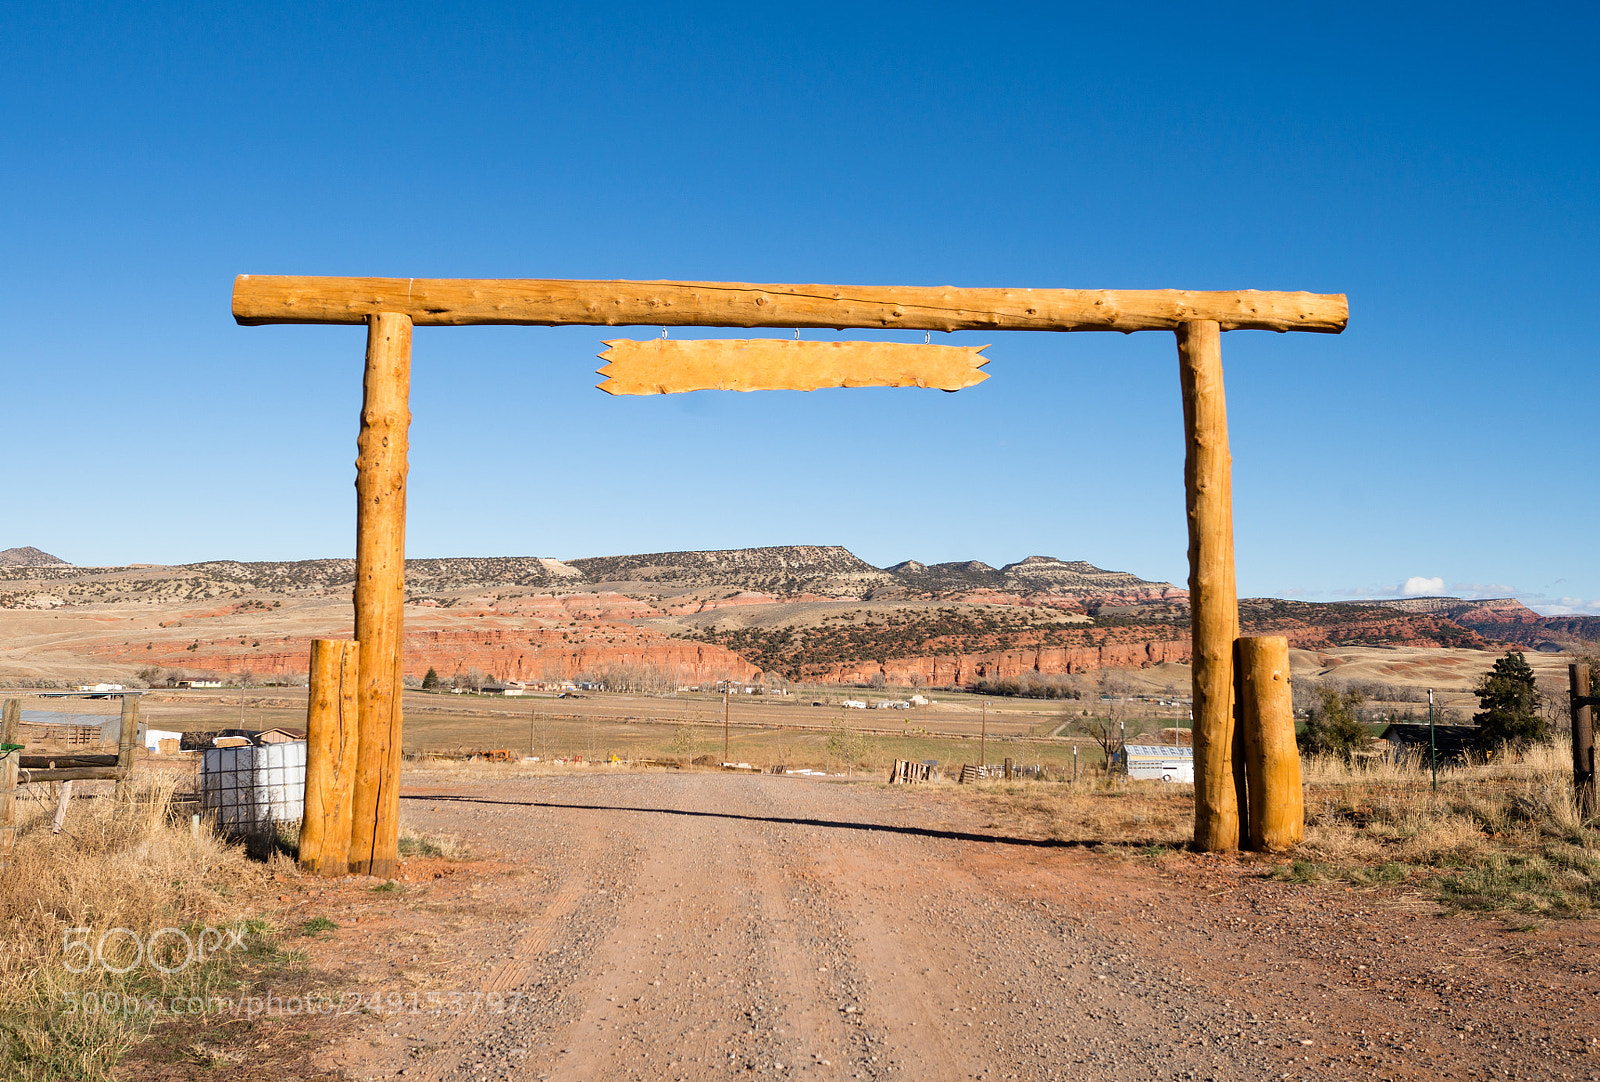 Sony a99 II sample photo. Ranch entrance gate country photography